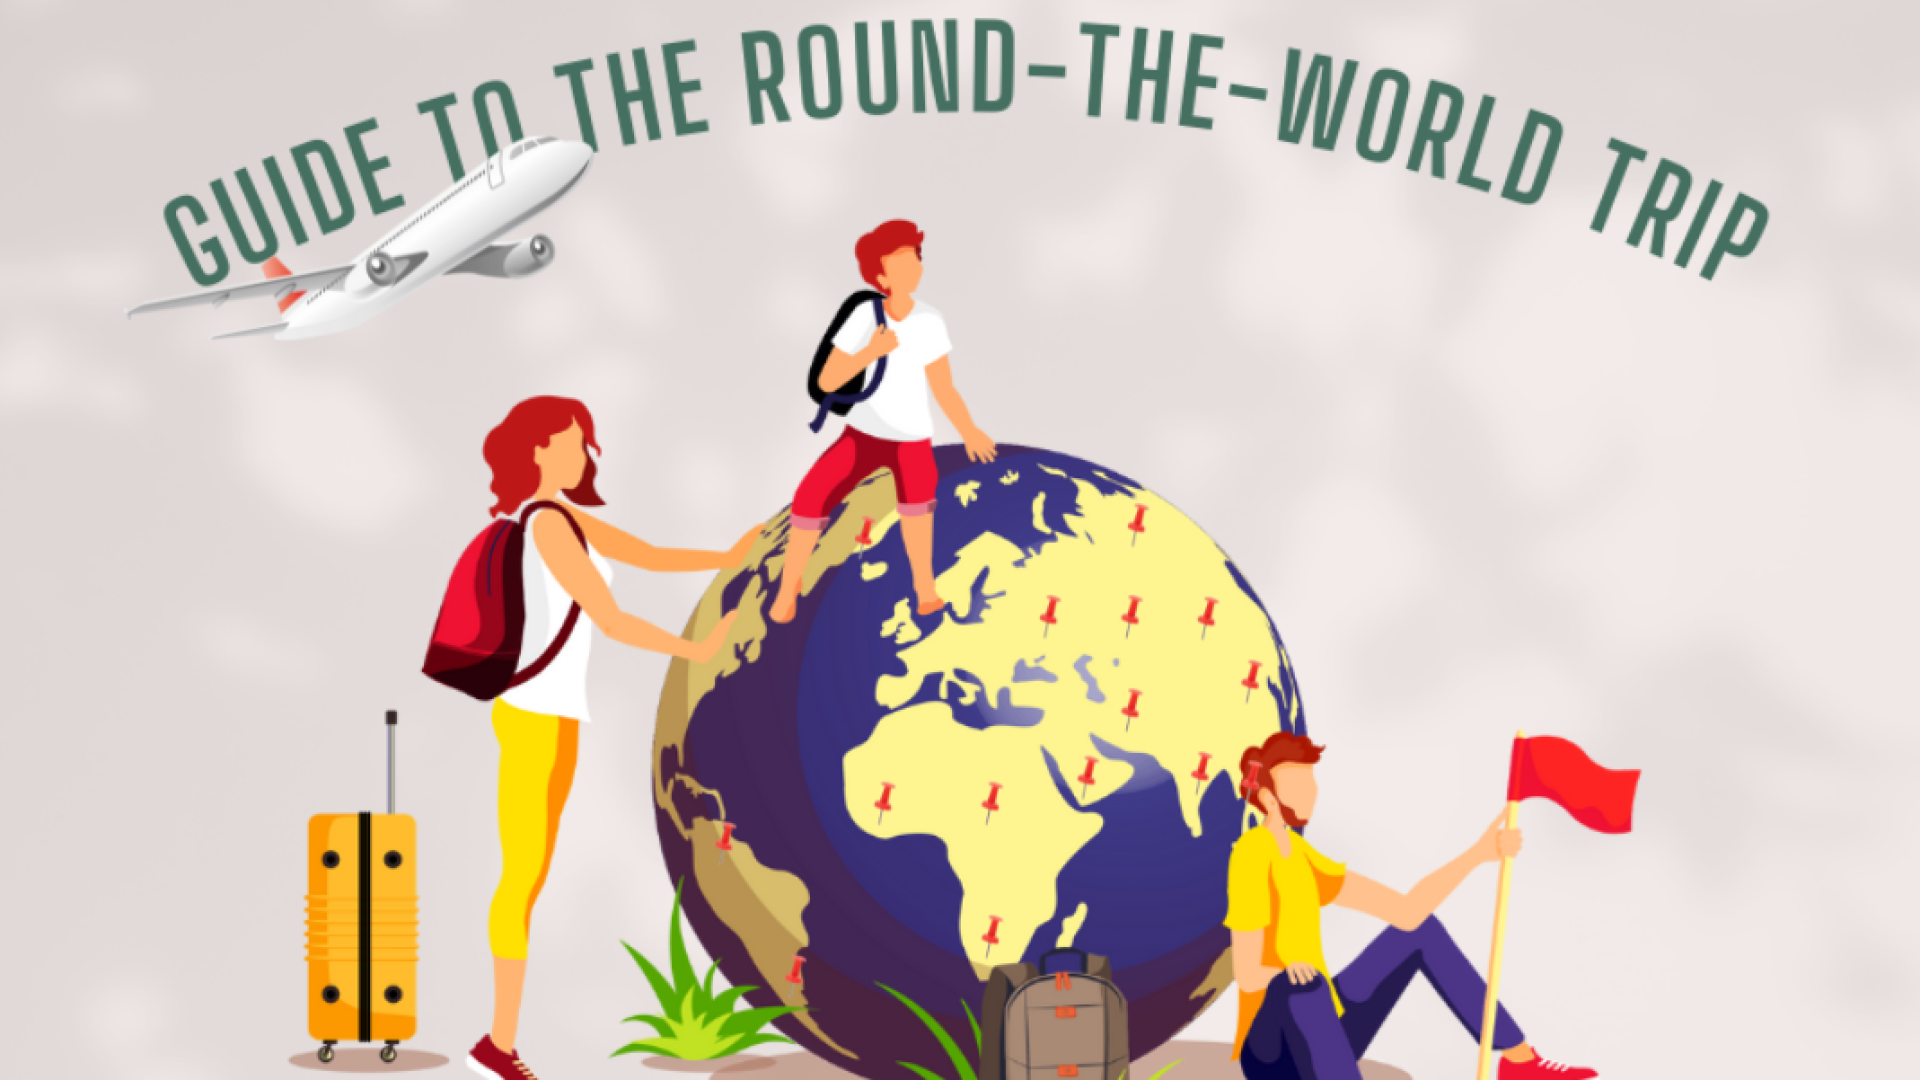 guide to the around the world trip - easyworld travels 1